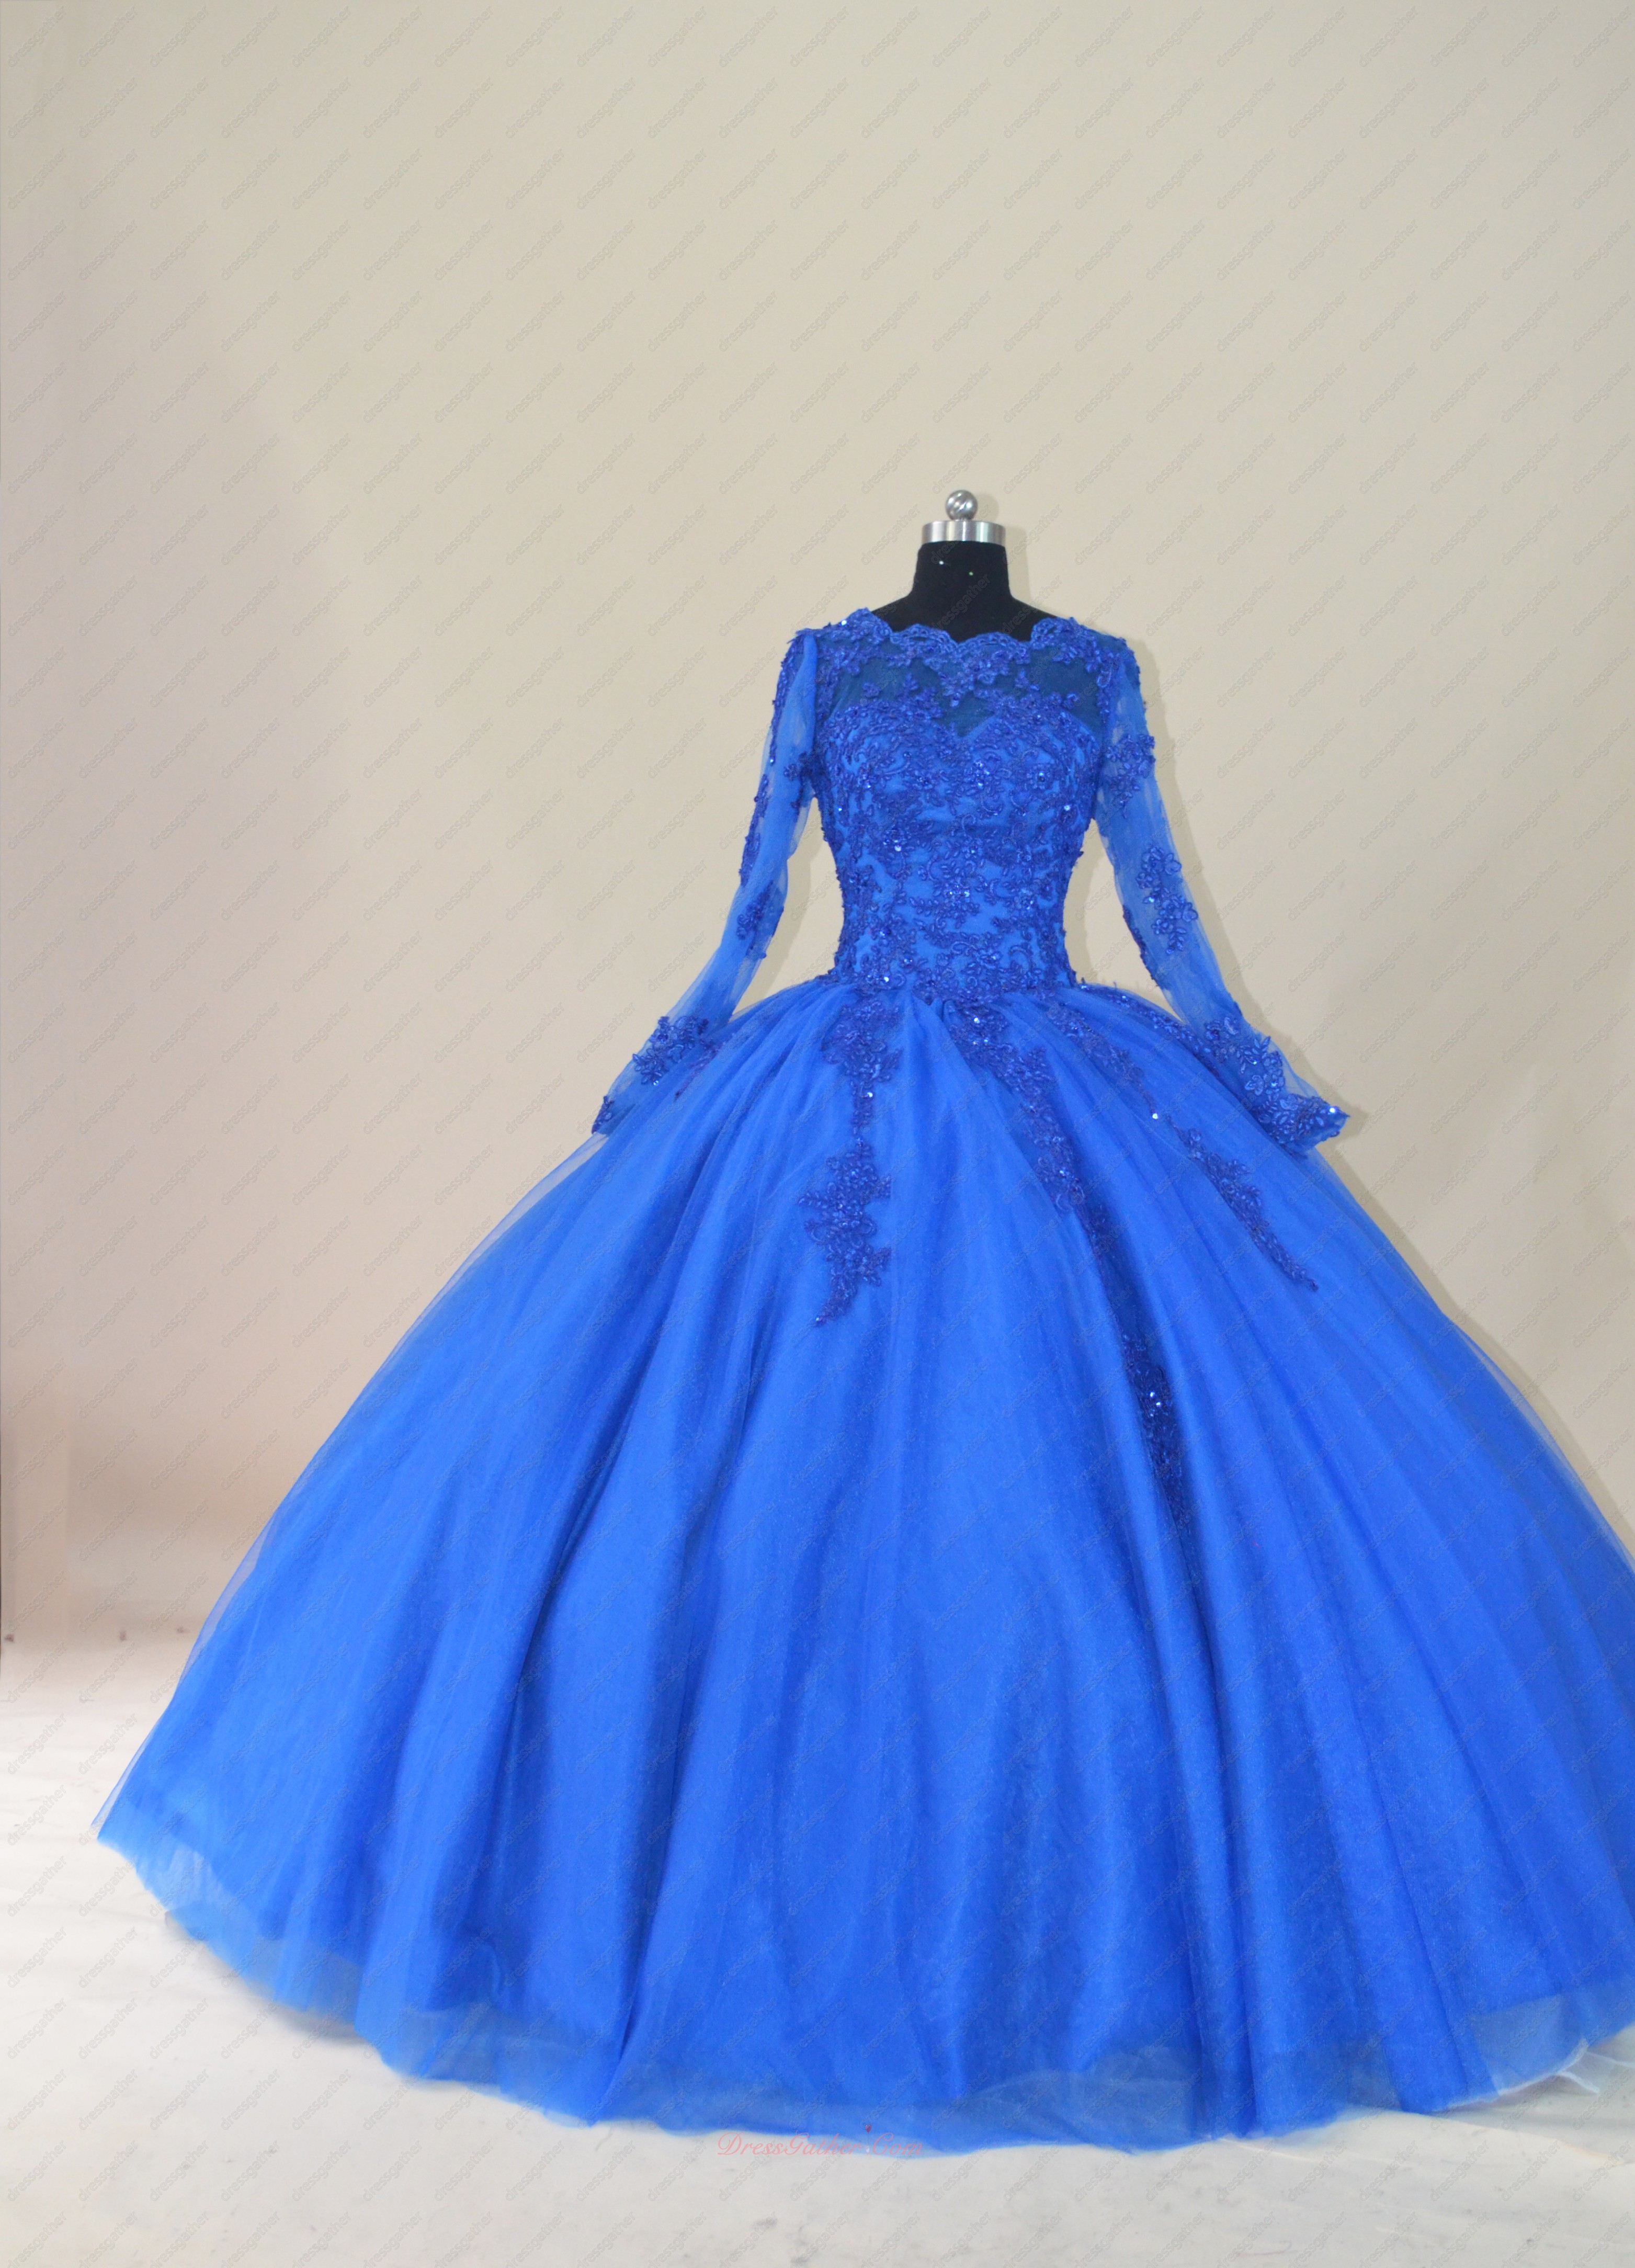 Religious Modest Long Sleeves Royal Blue Winter Church Quinceanera Dress Traditional - Click Image to Close